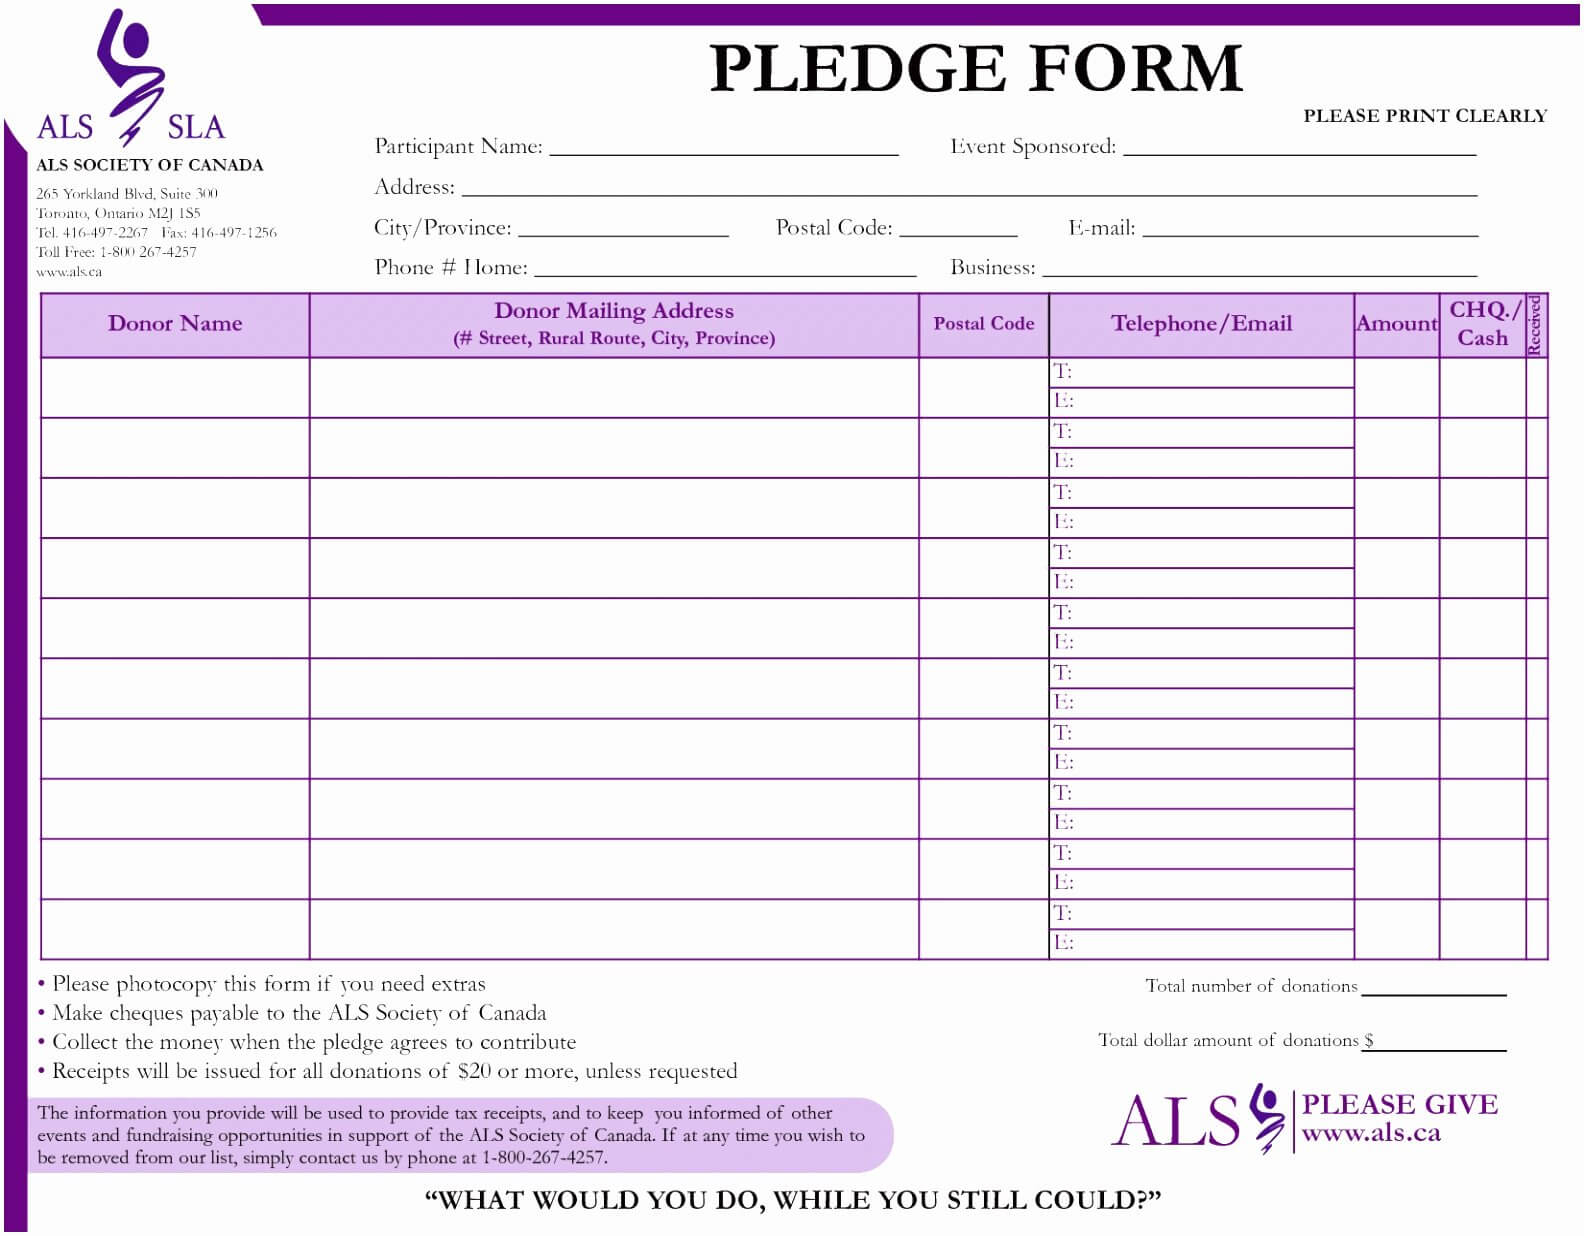 039 Pledge Card Template Word Best Of Fundraiser Form Pttyt Intended For Free Pledge Card Template